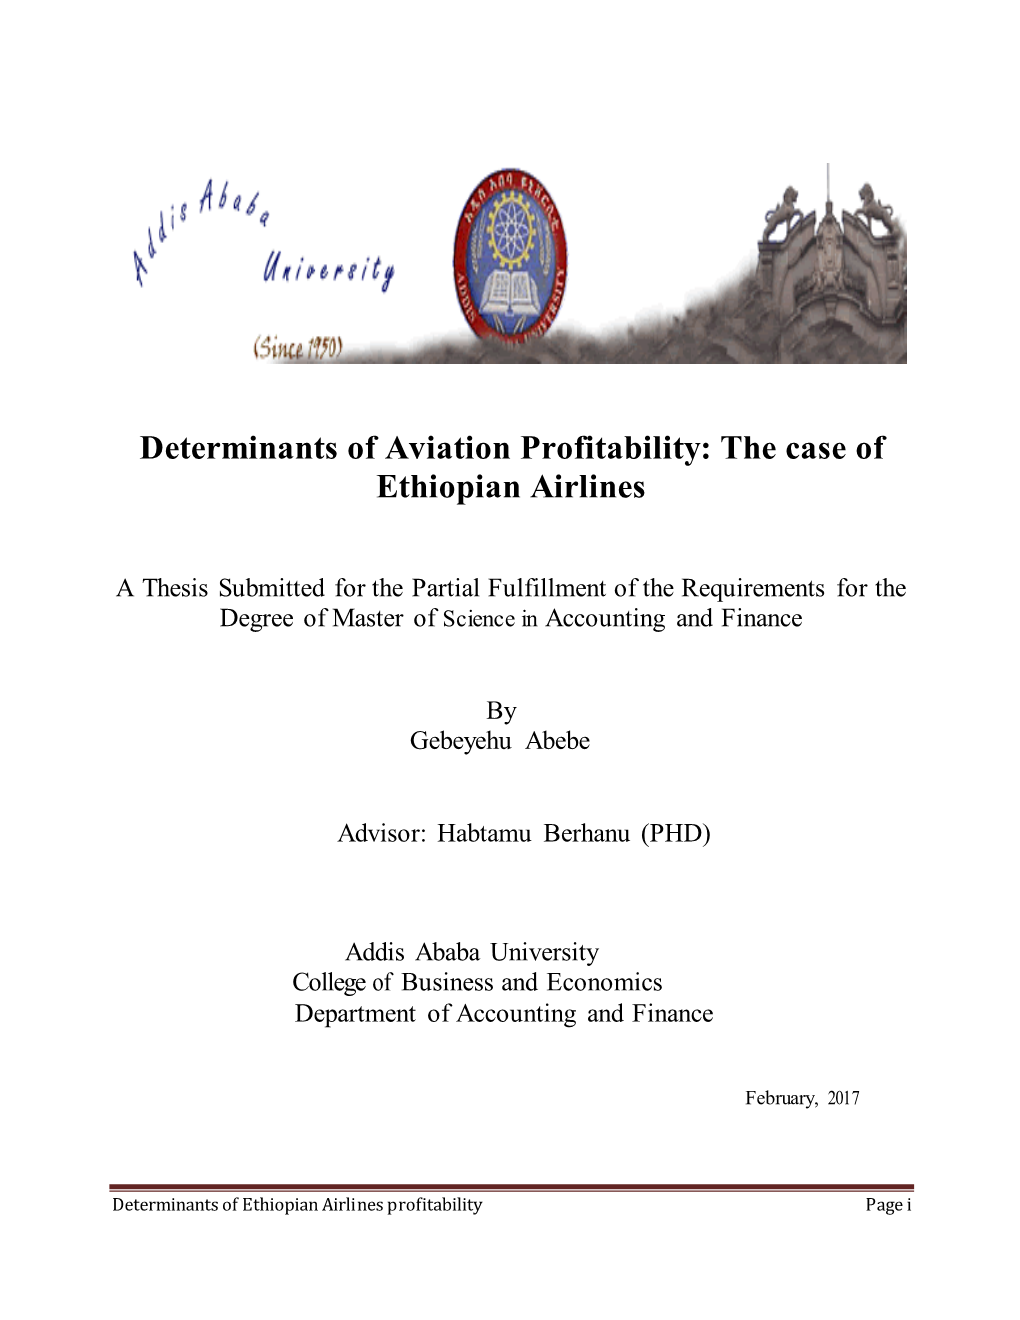 Determinants of Aviation Profitability: the Case of Ethiopian Airlines